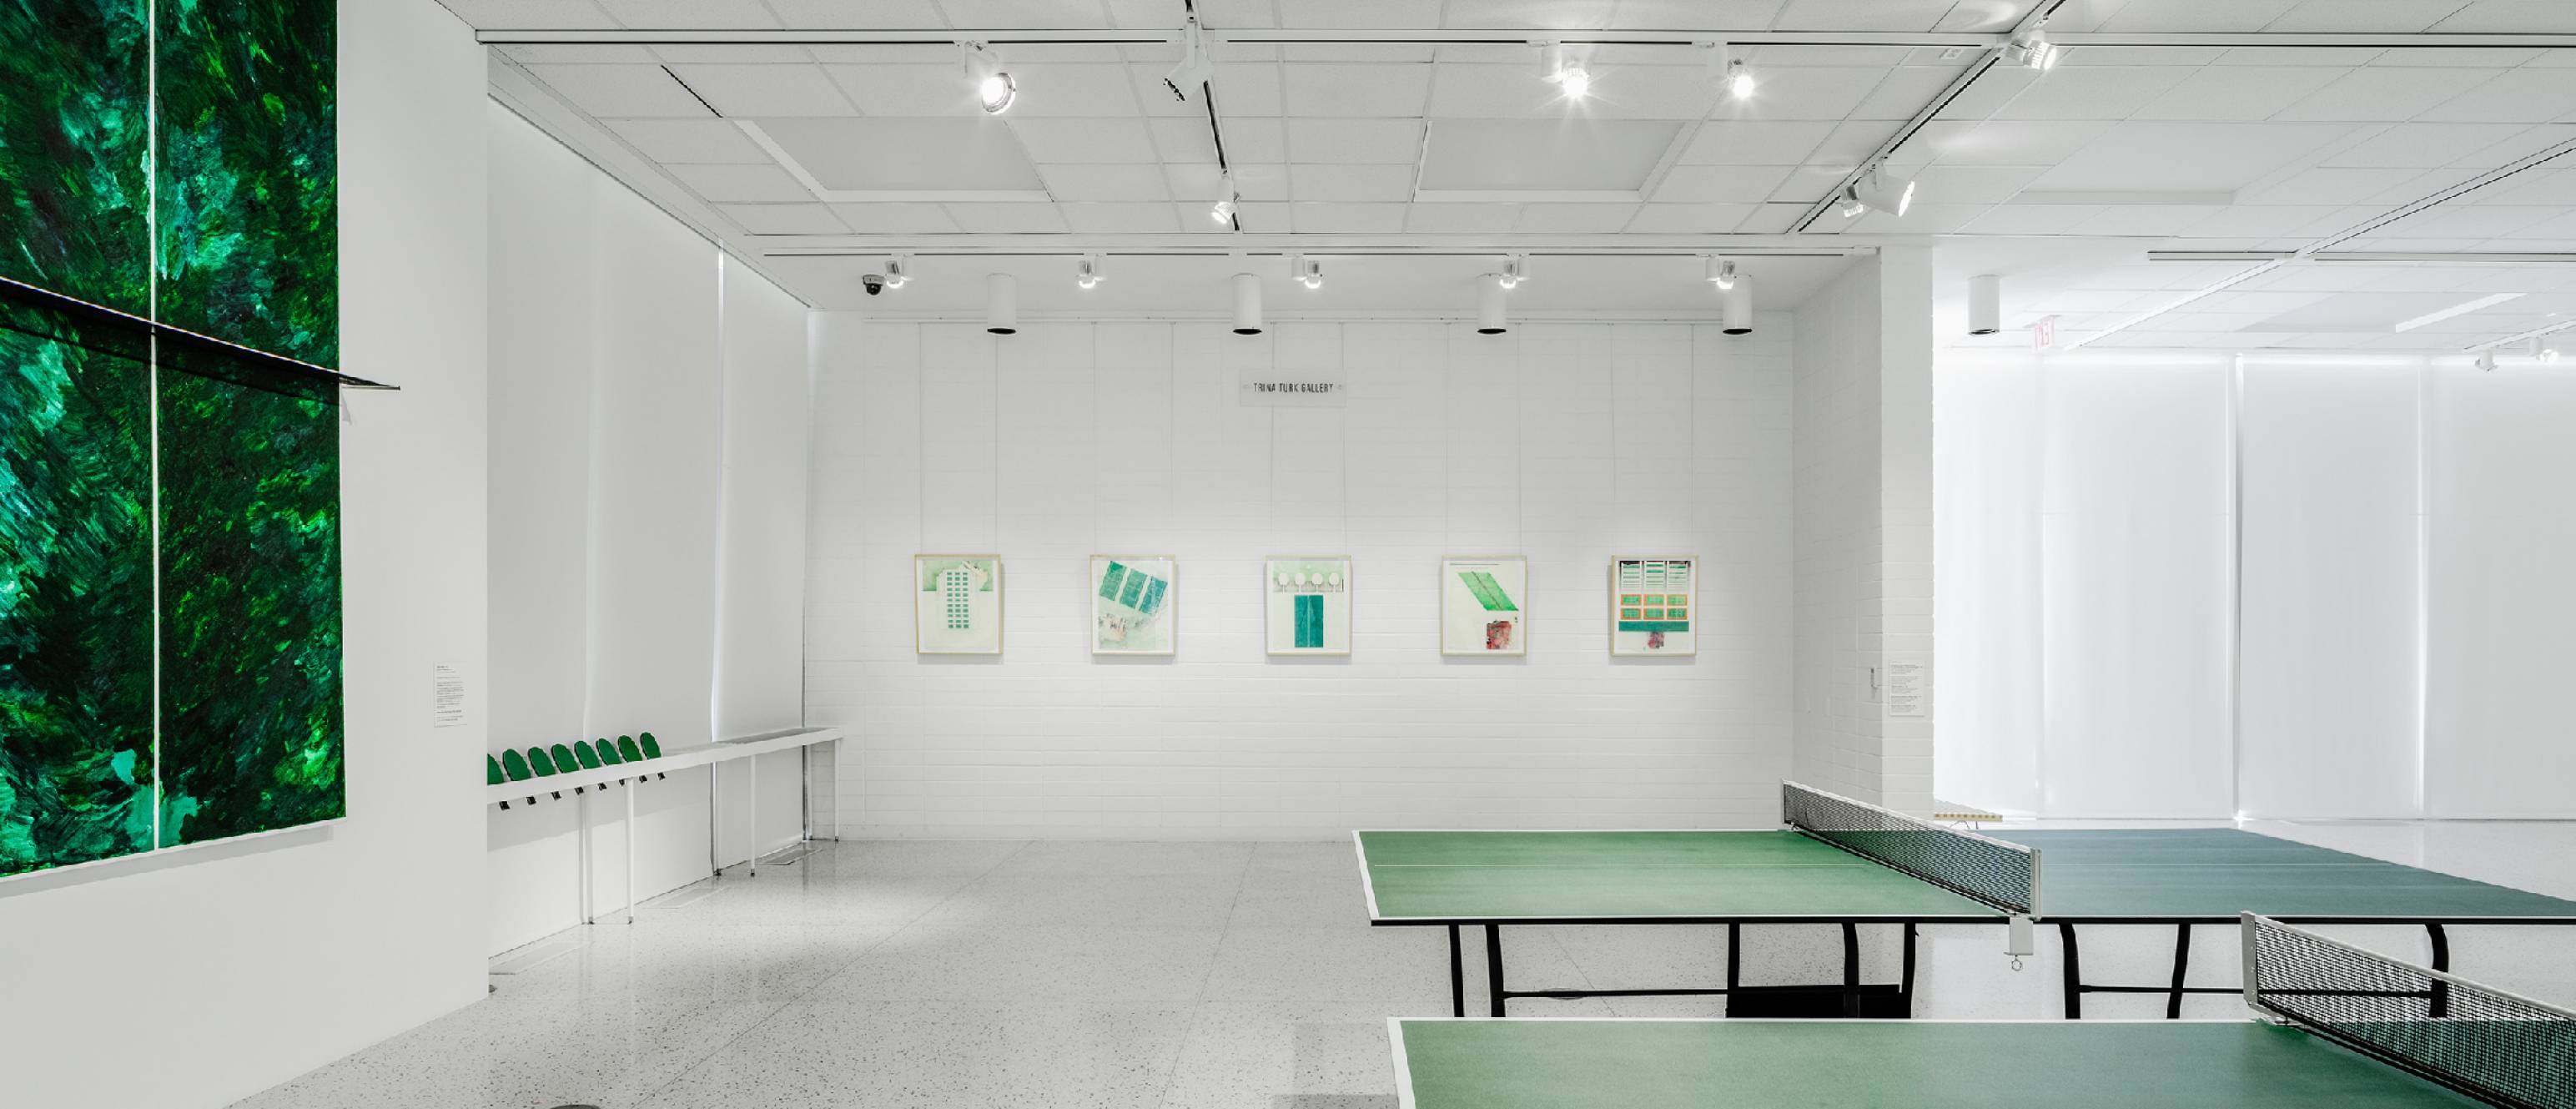 Ping pong tables, drawings and artworks in the gallery